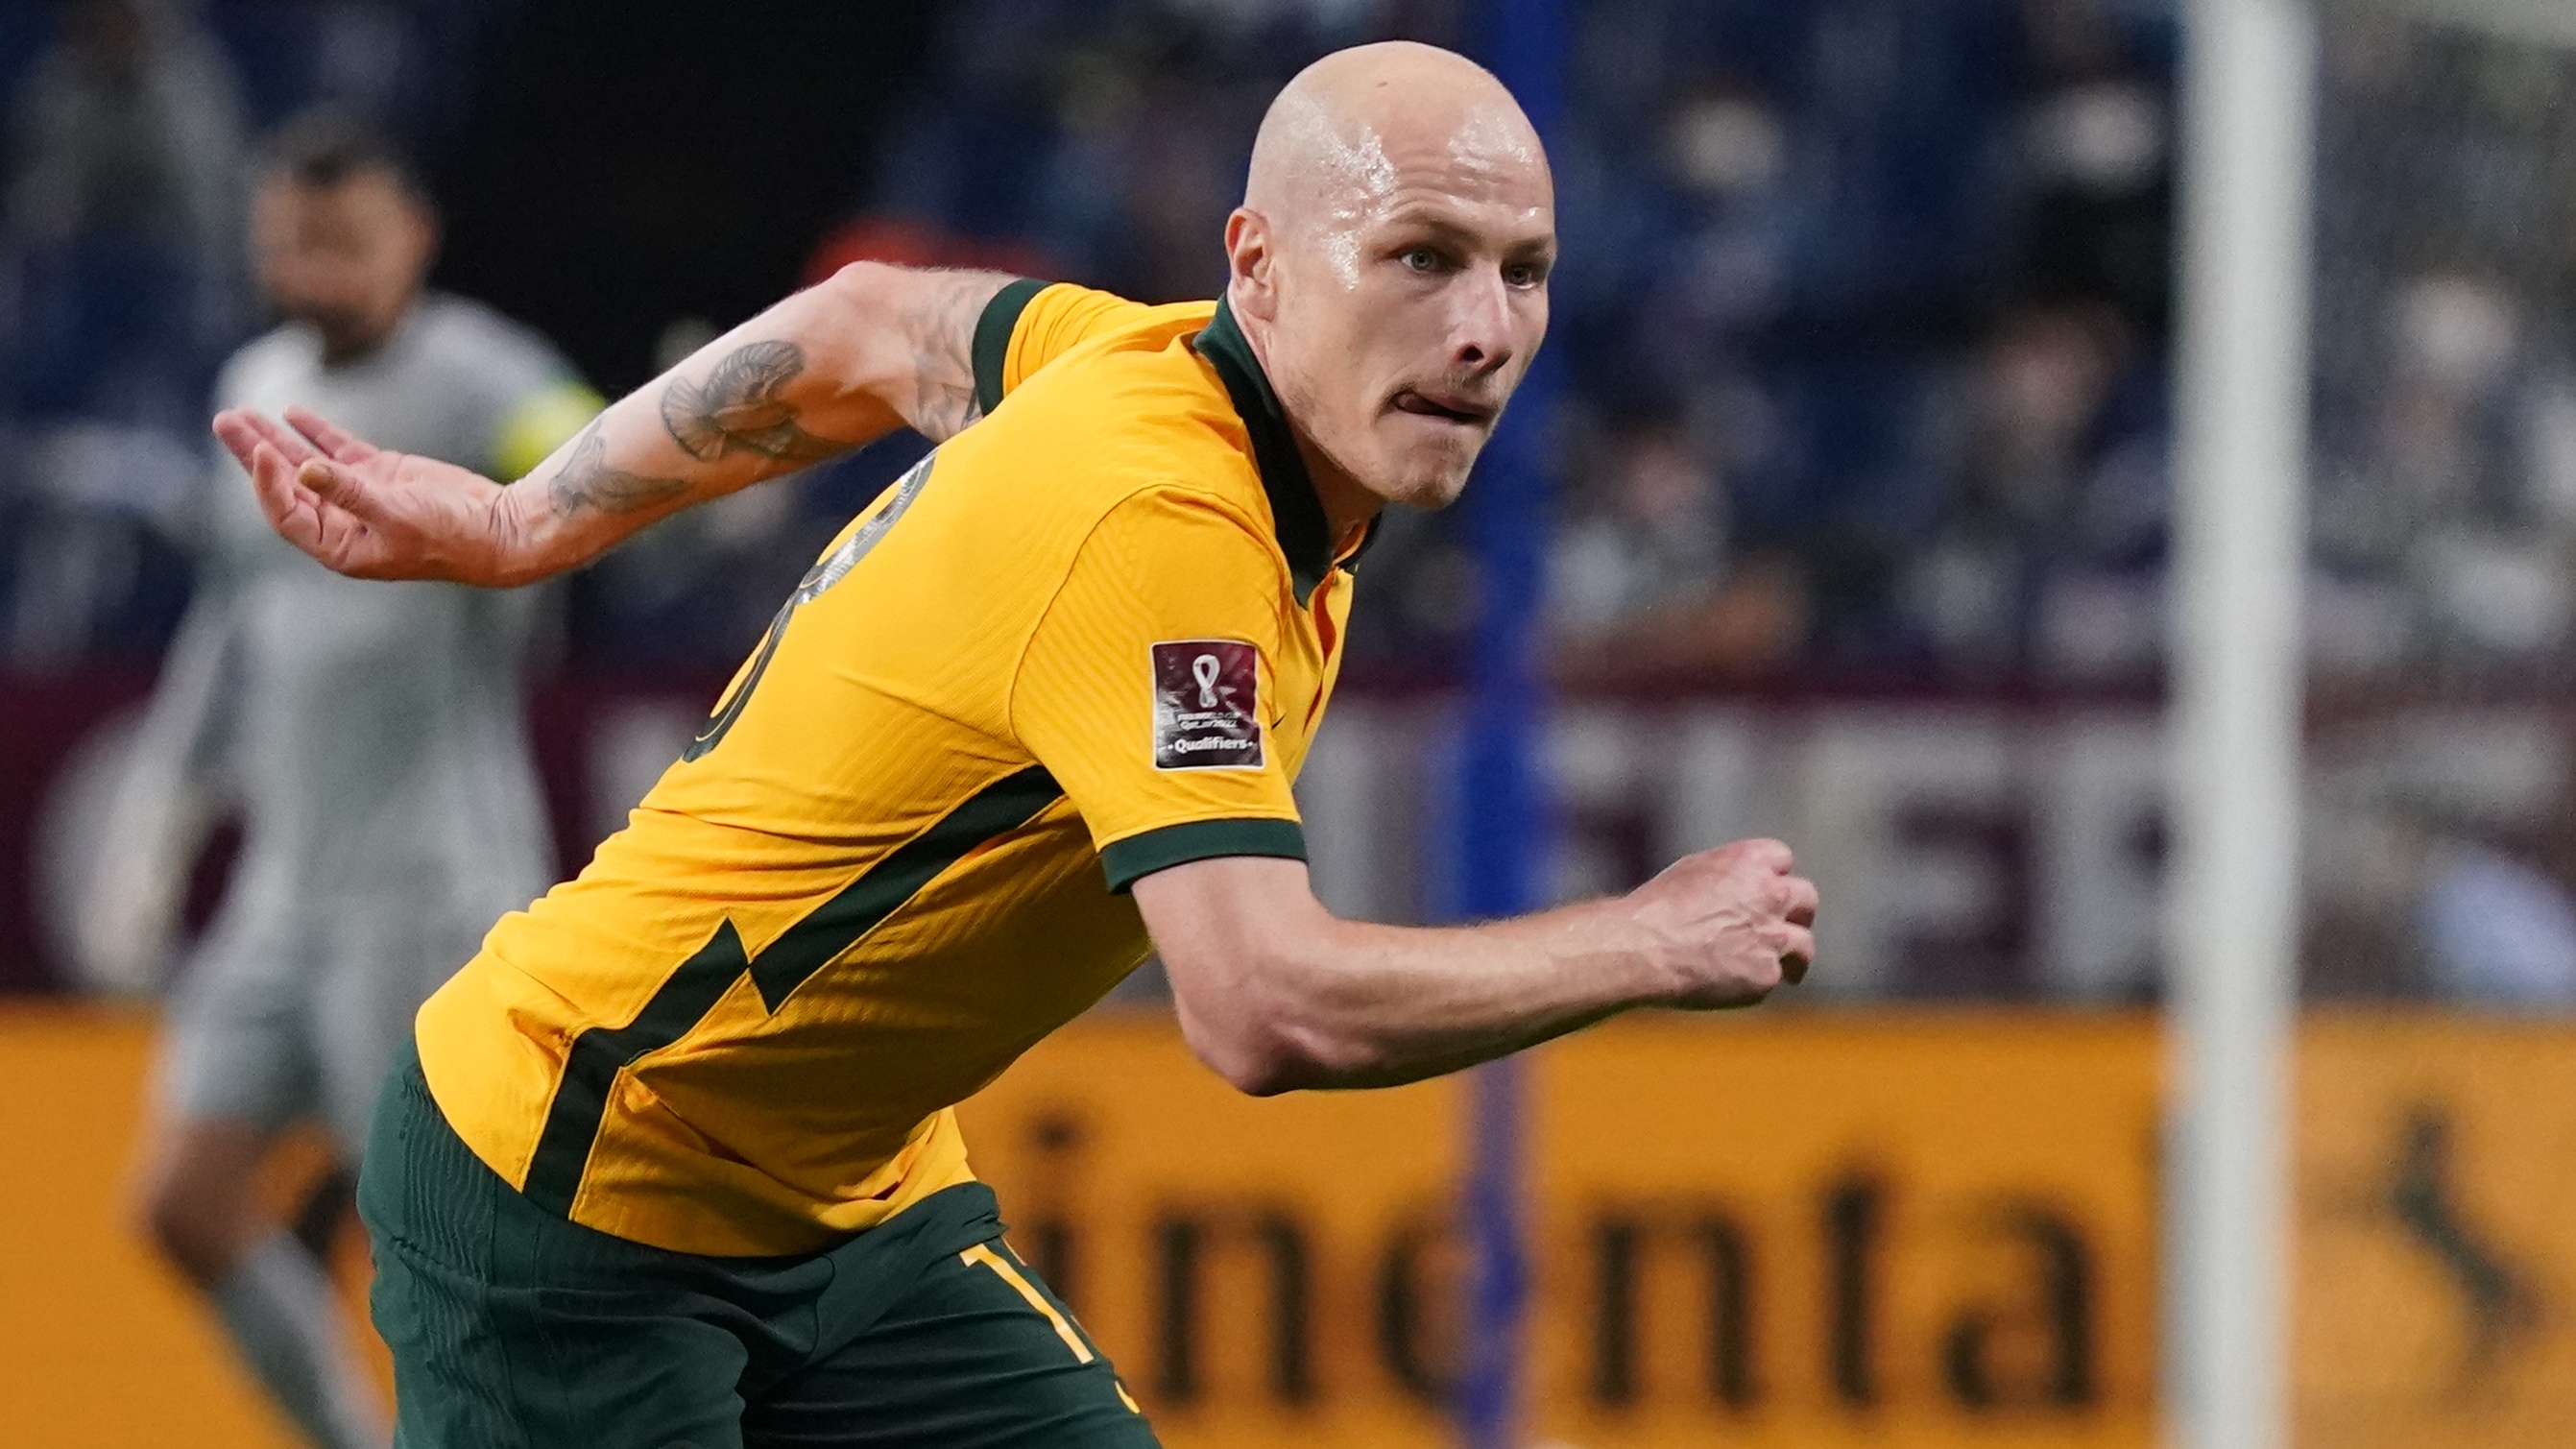 Mooy chose country over club, and it paid off